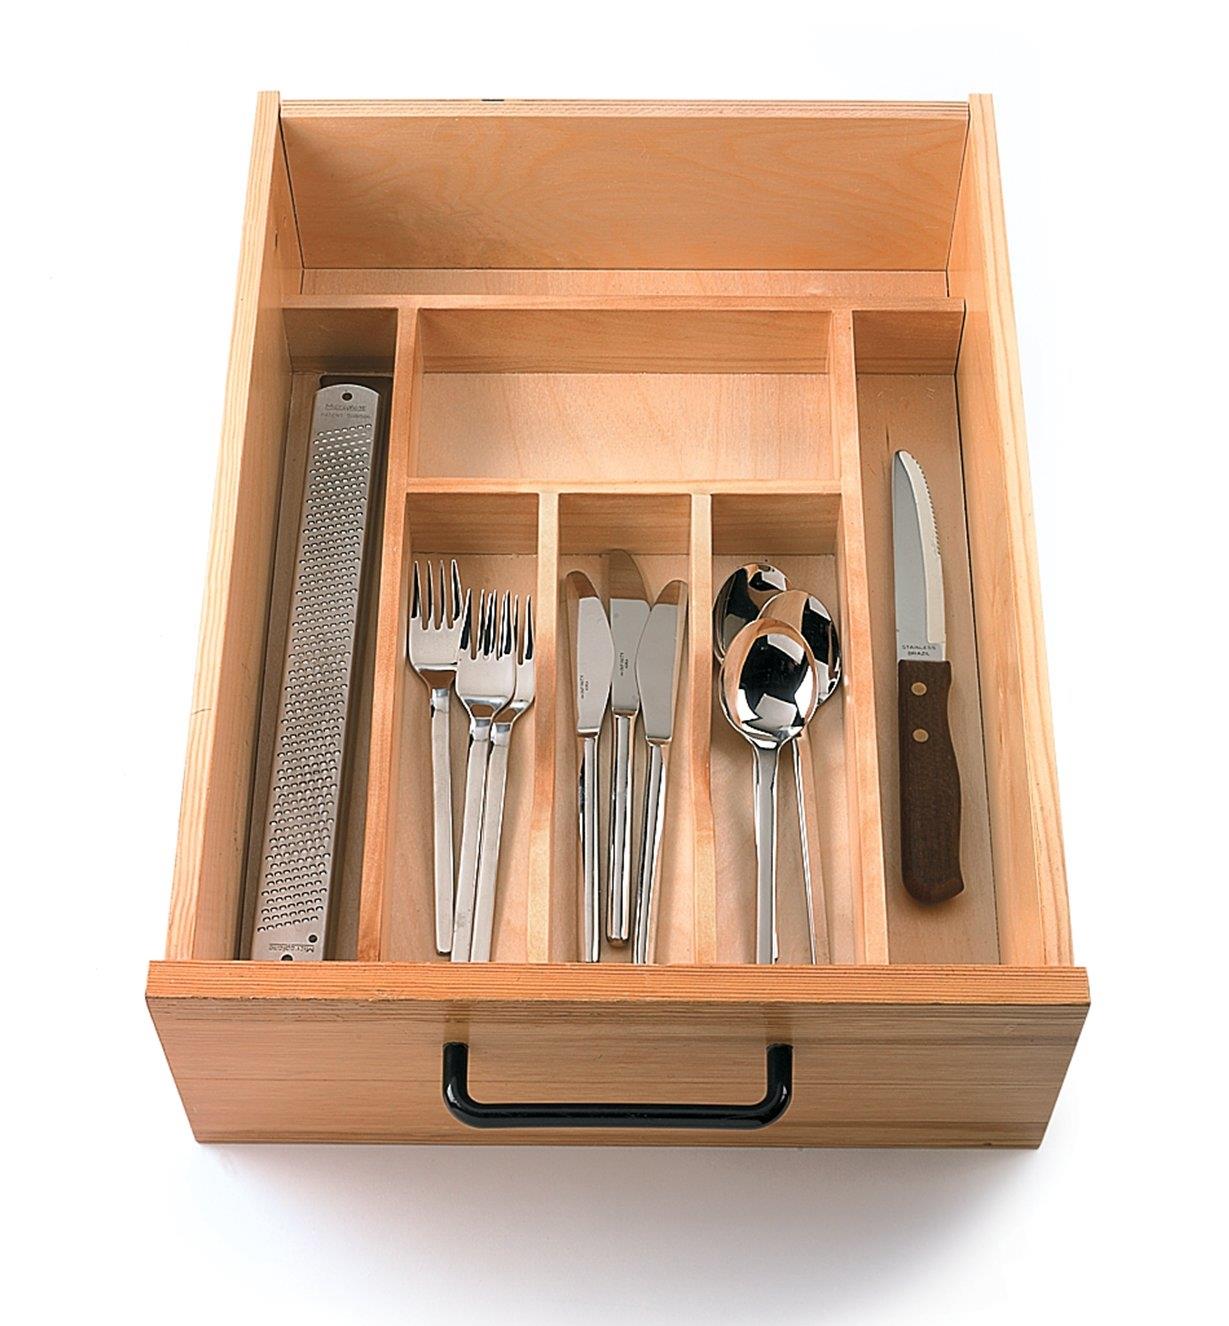 Wooden Cutlery Trays Lee Valley Tools, Wooden Utensil Tray